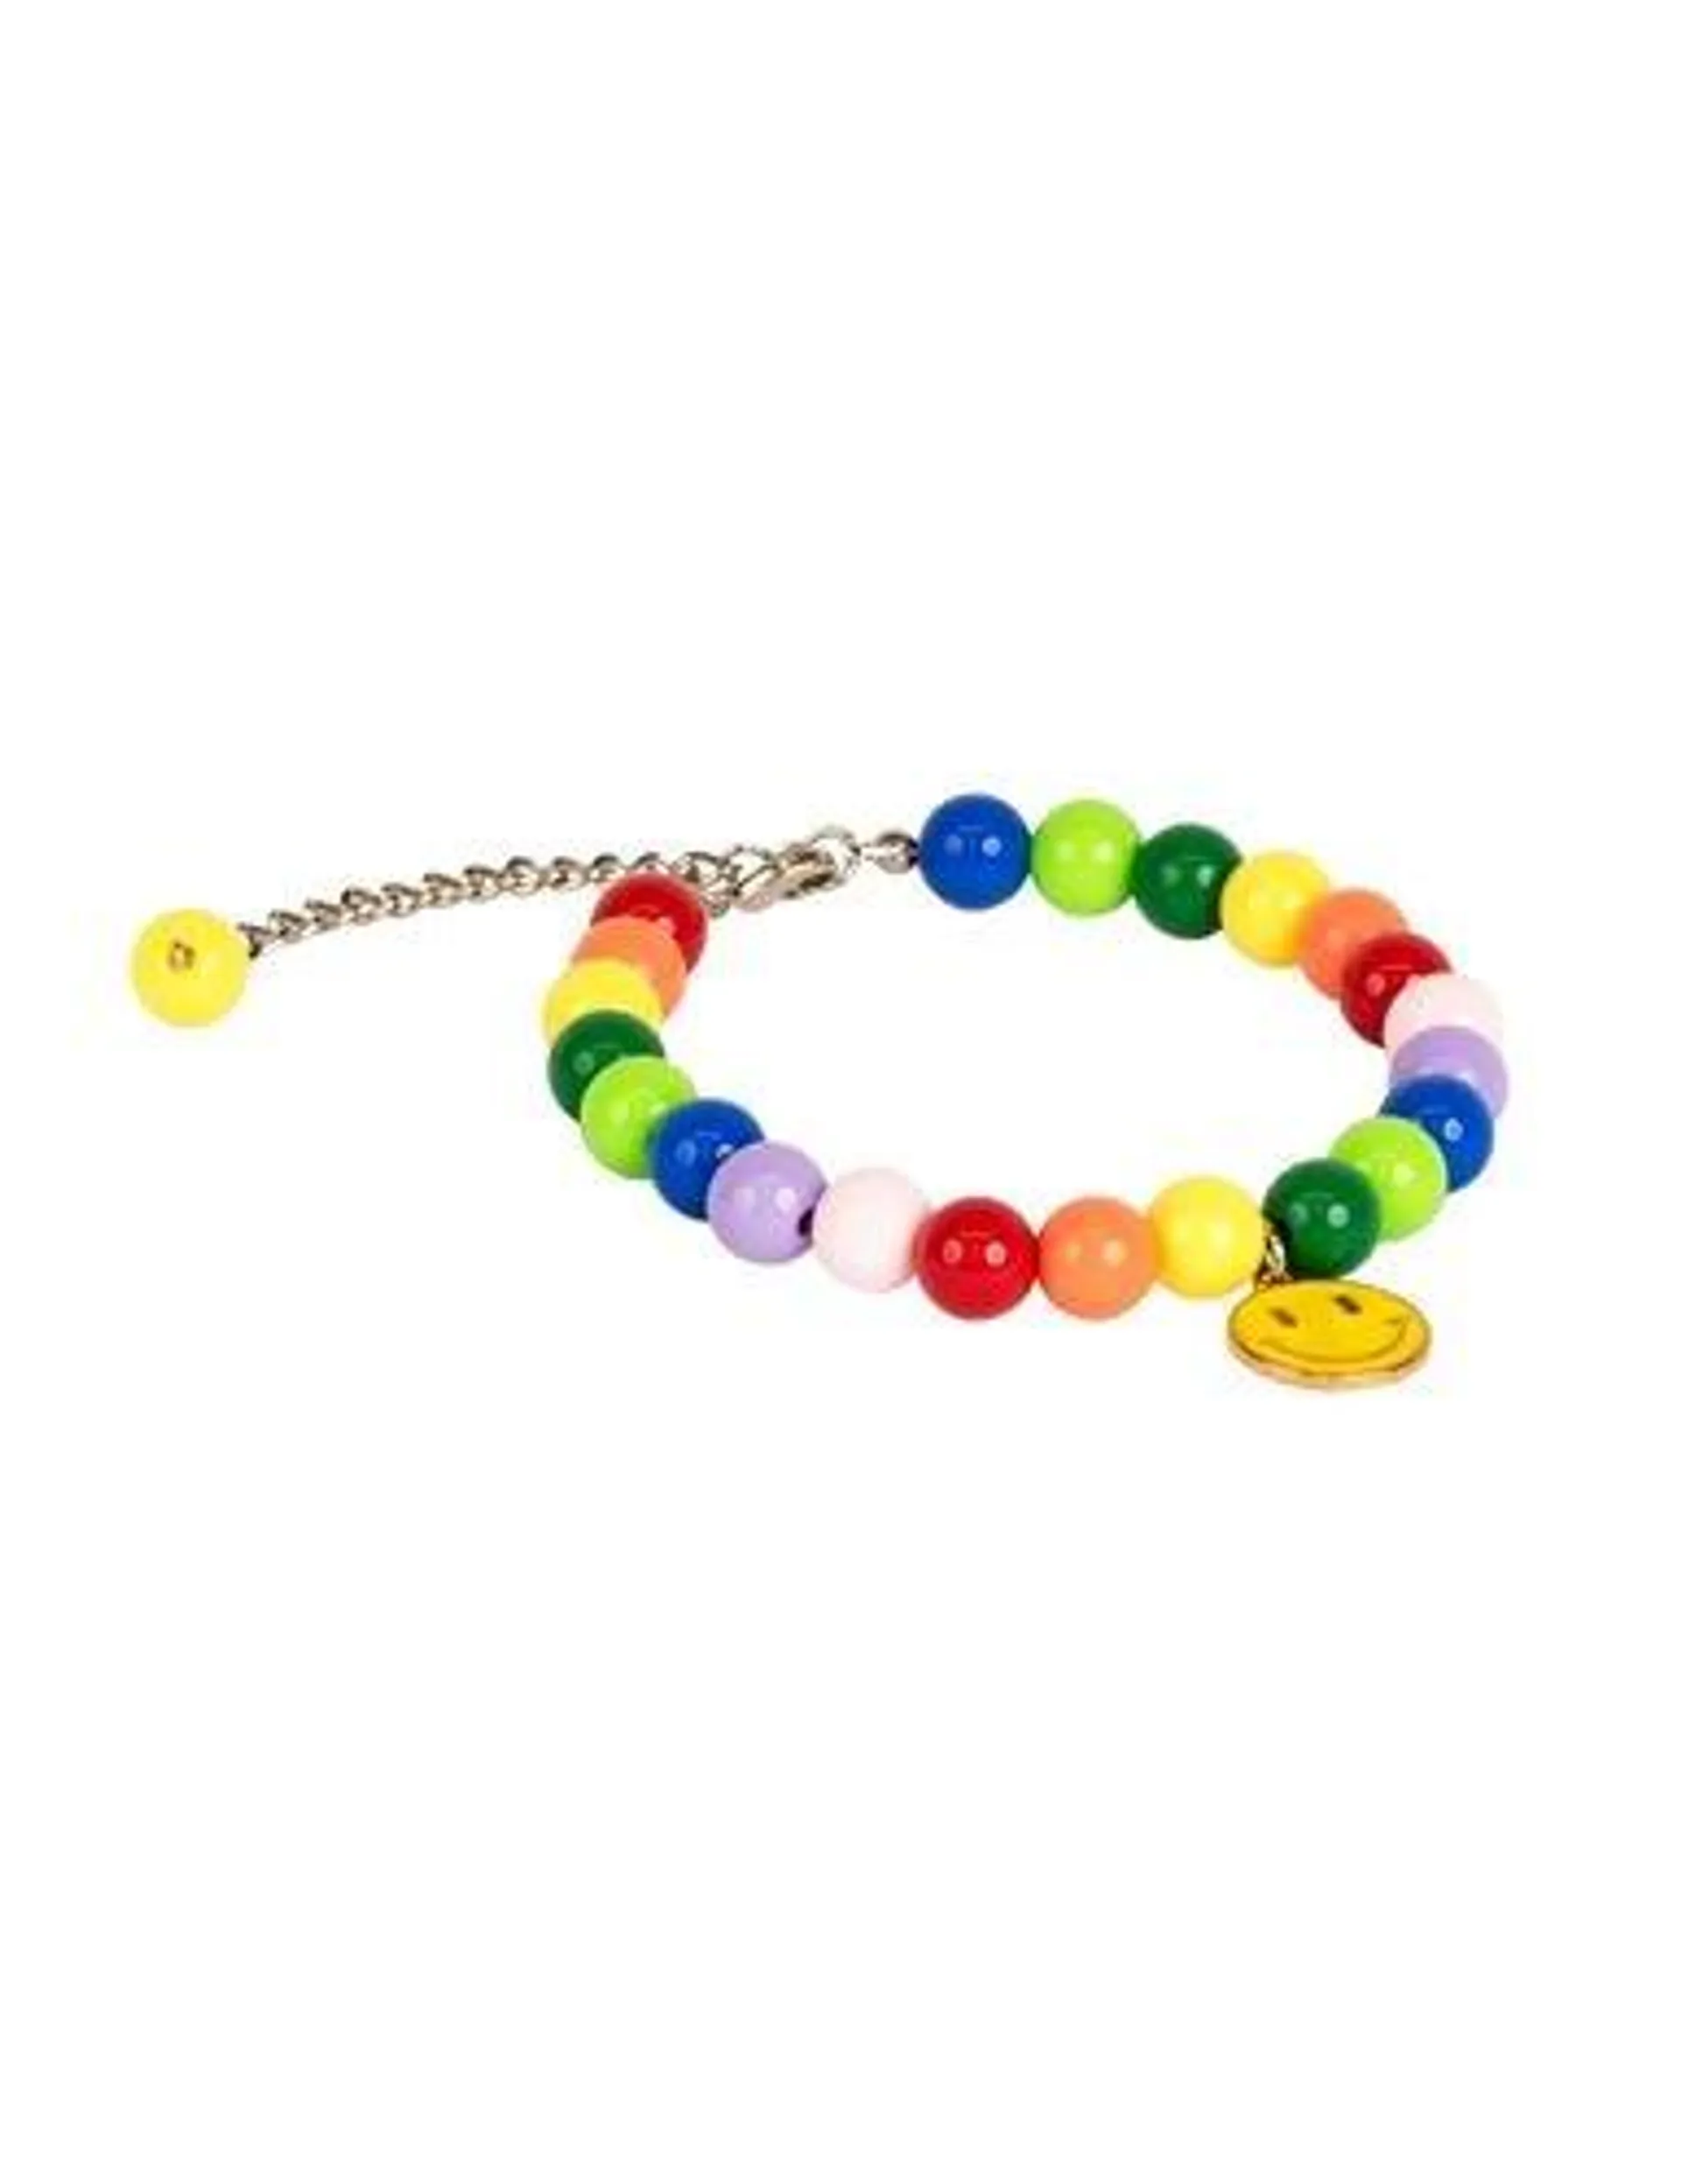 Play On Pride Smiley Necklace, Medium/Large